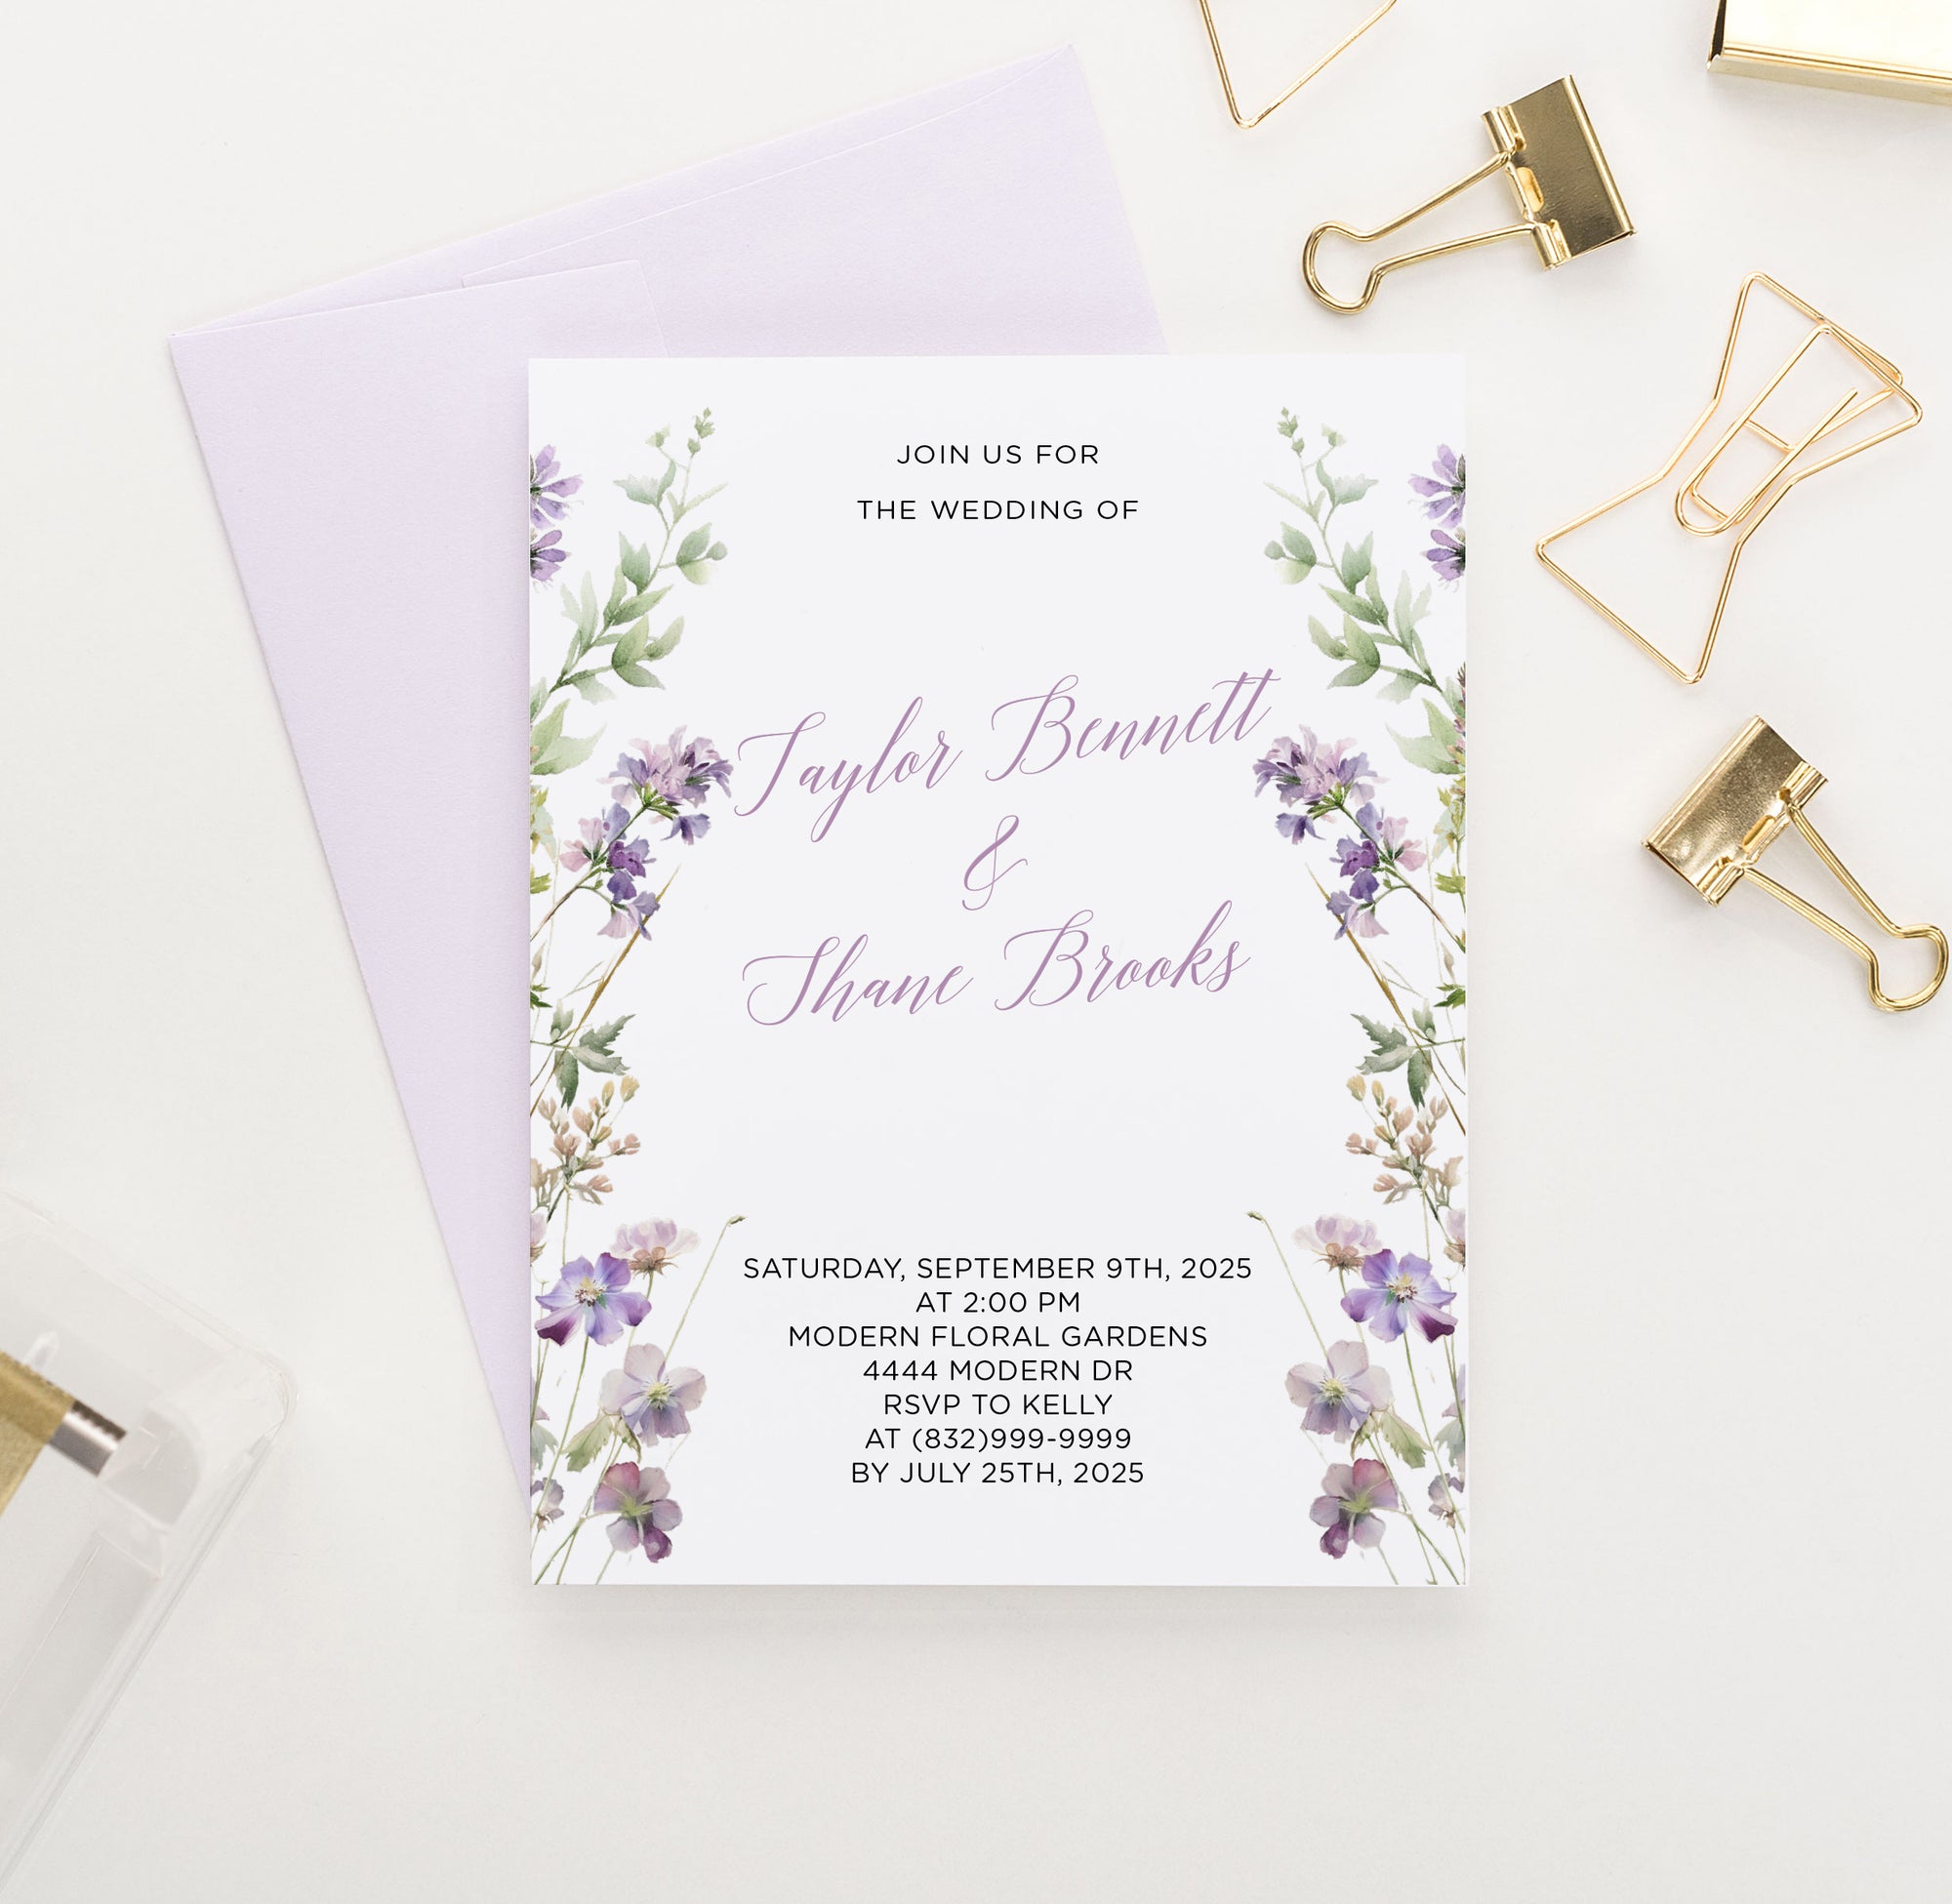 Sophisticated Purple Wedding Invitations with Florals